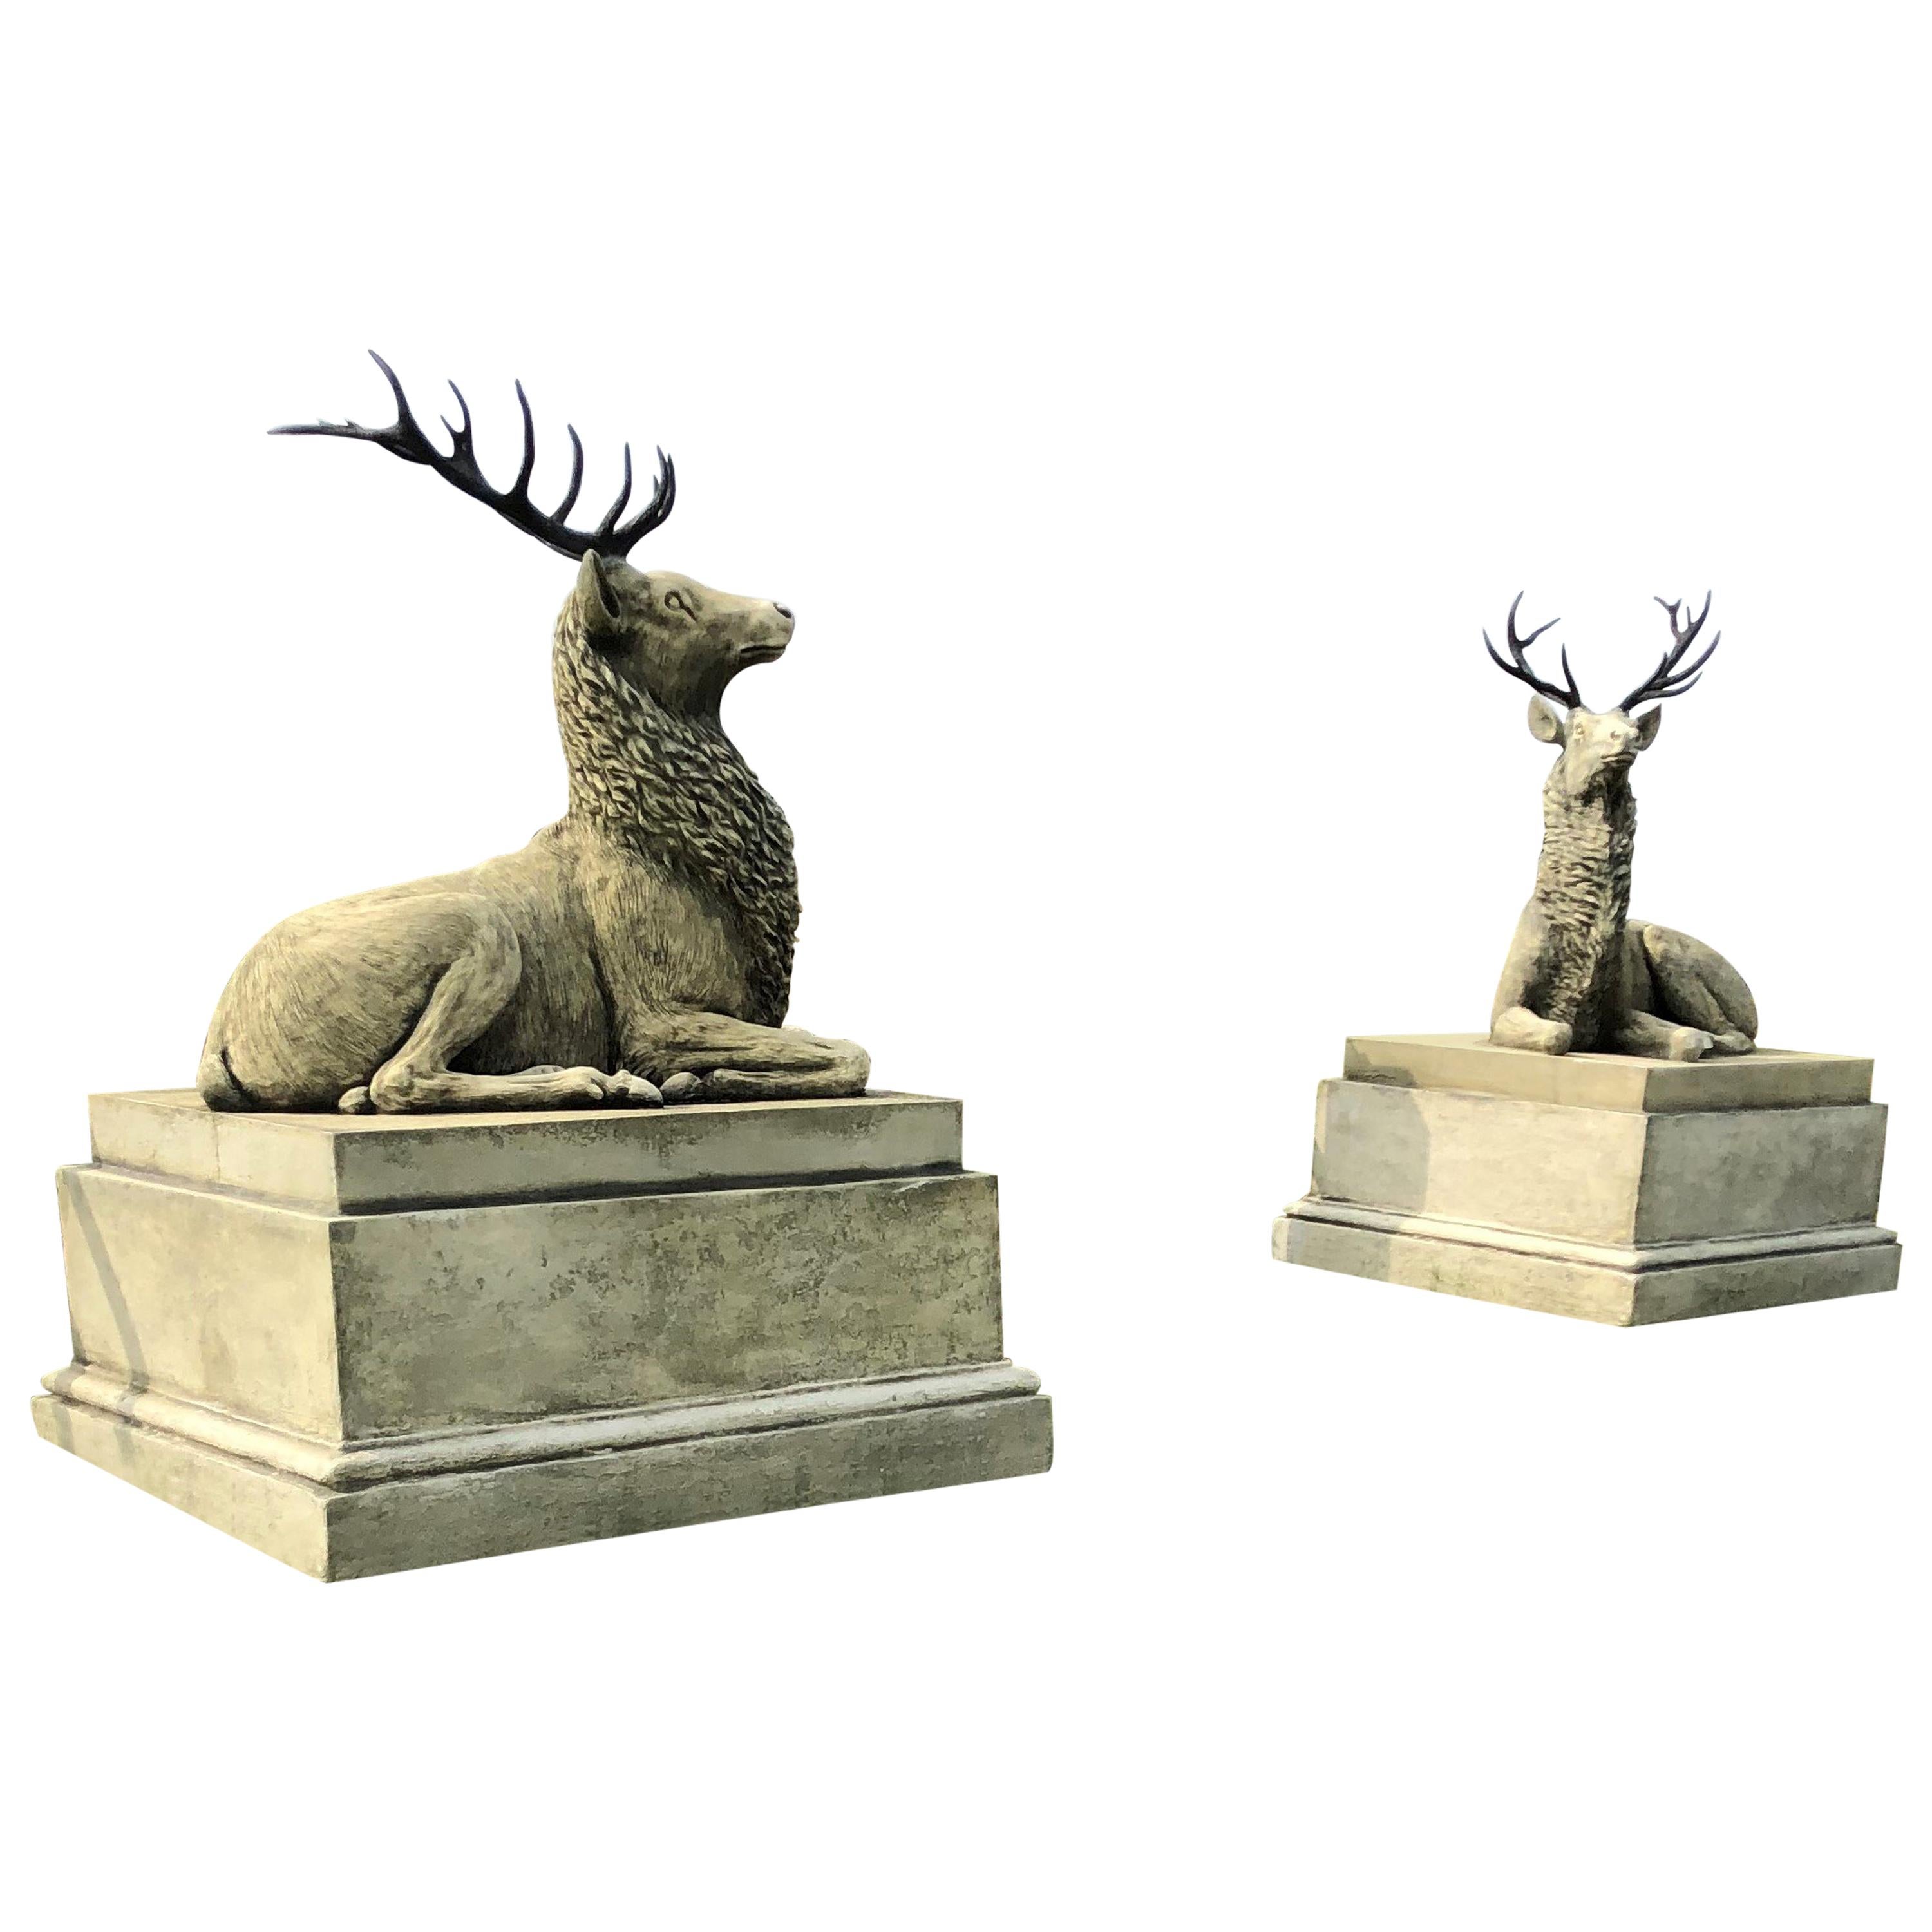 Pair of Large Composite Stone Recumbent Stags on Plinths, 21st Century